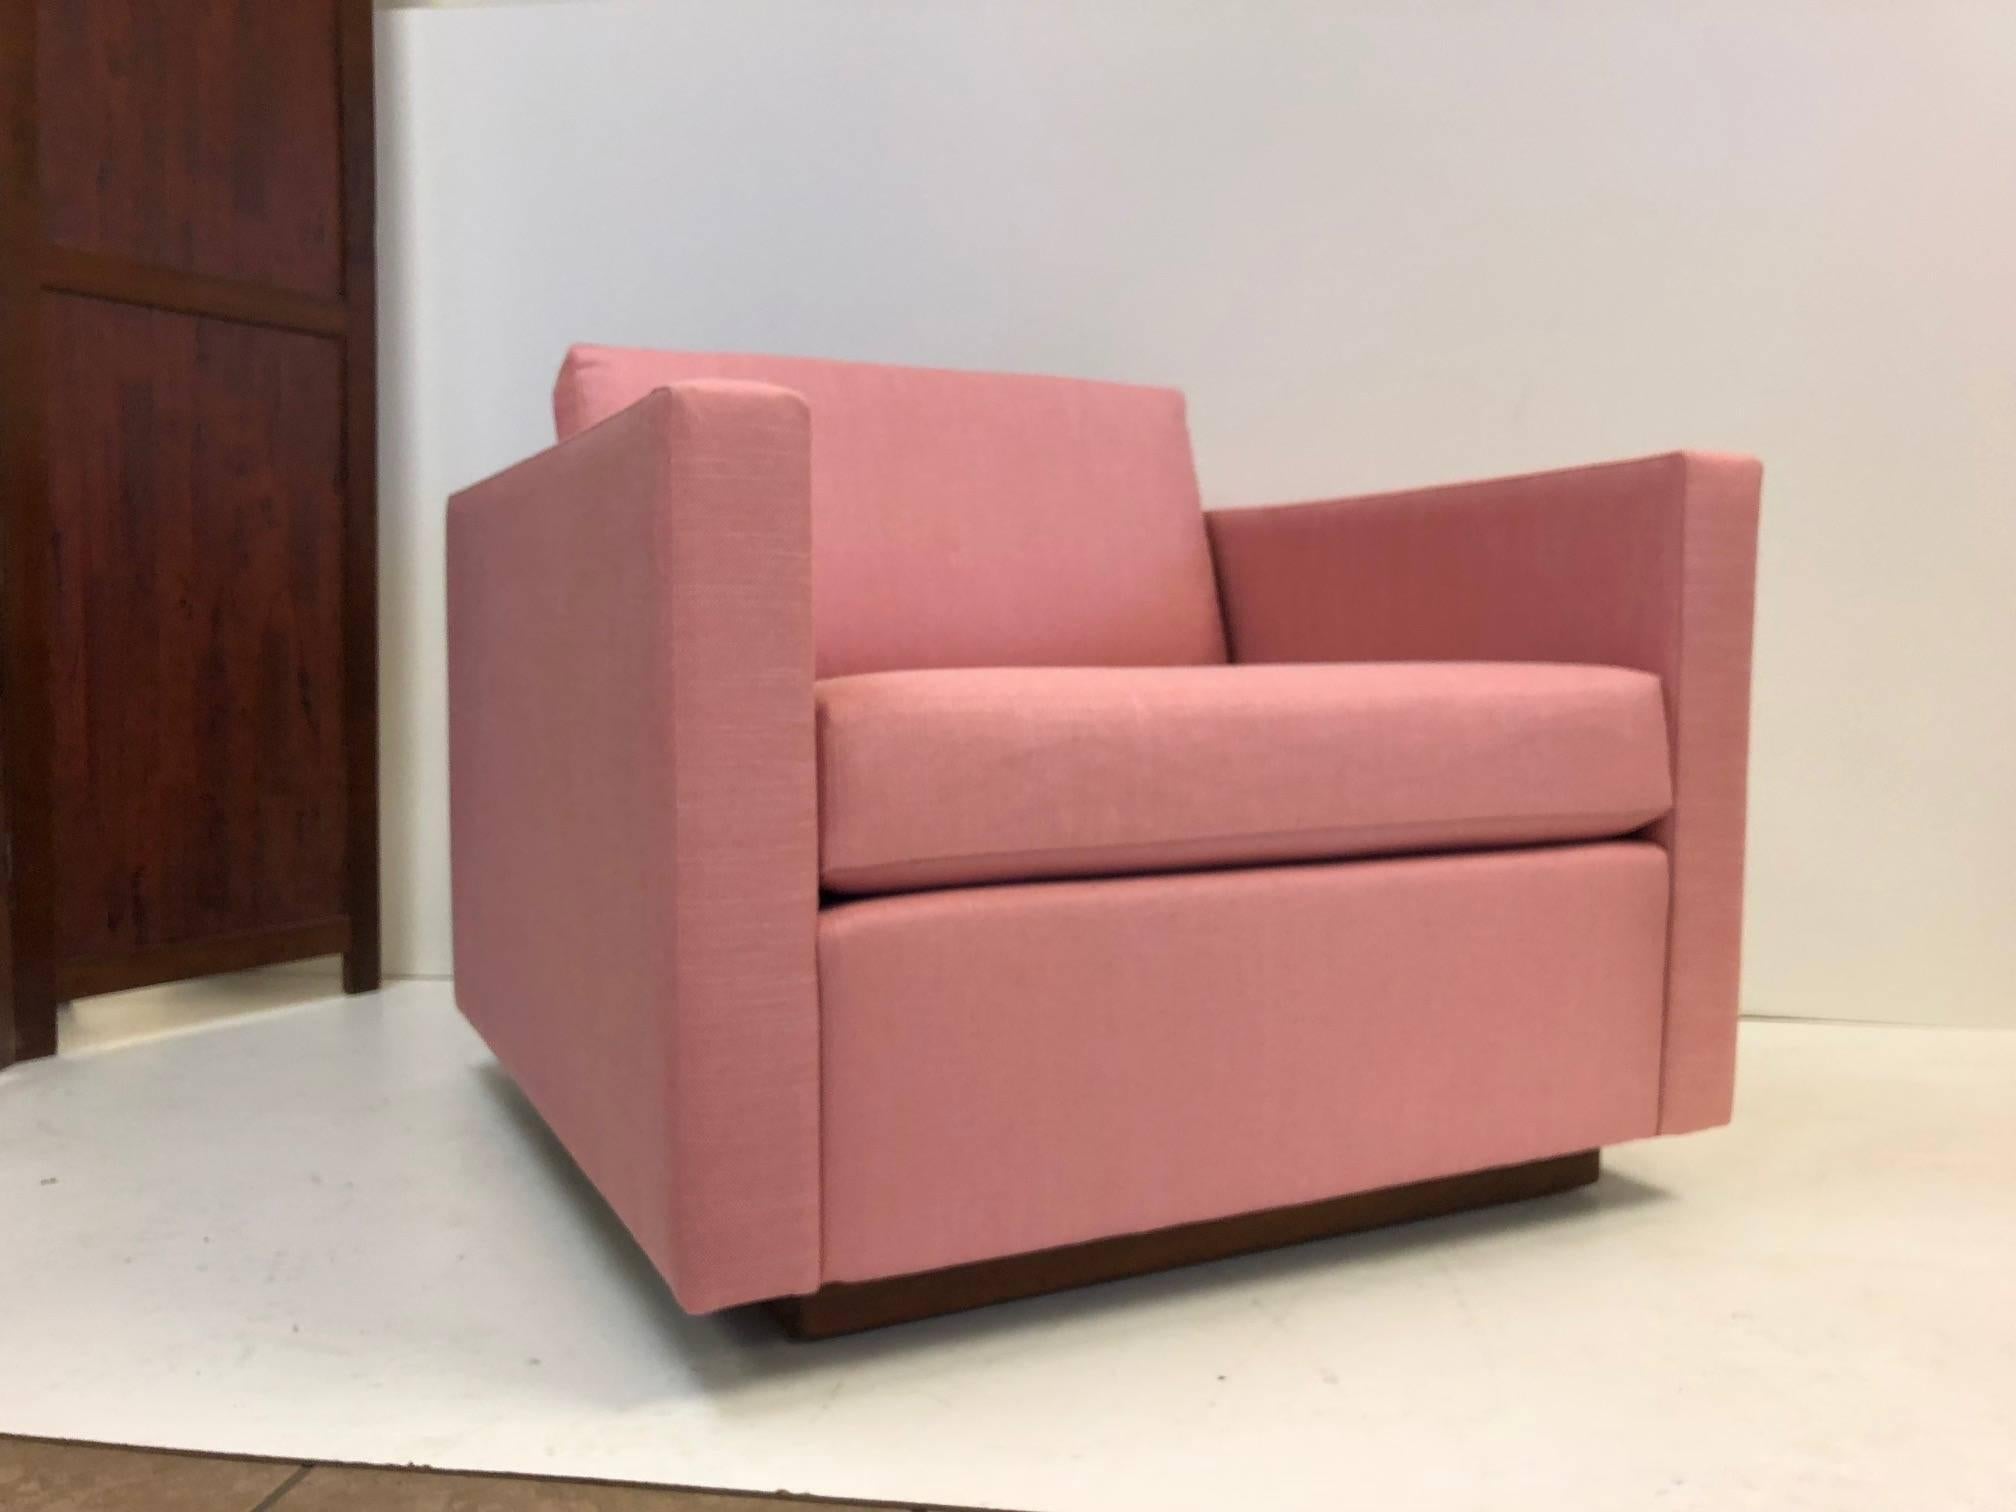 Pair of Harvey Probber cube lounge/club chairs on a solid walnut plinth base. Newly upholstered in a pink linen blend fabric. Retains label.
Measures: 30 H (to back cushion) x 34 D x 32.5 W.
